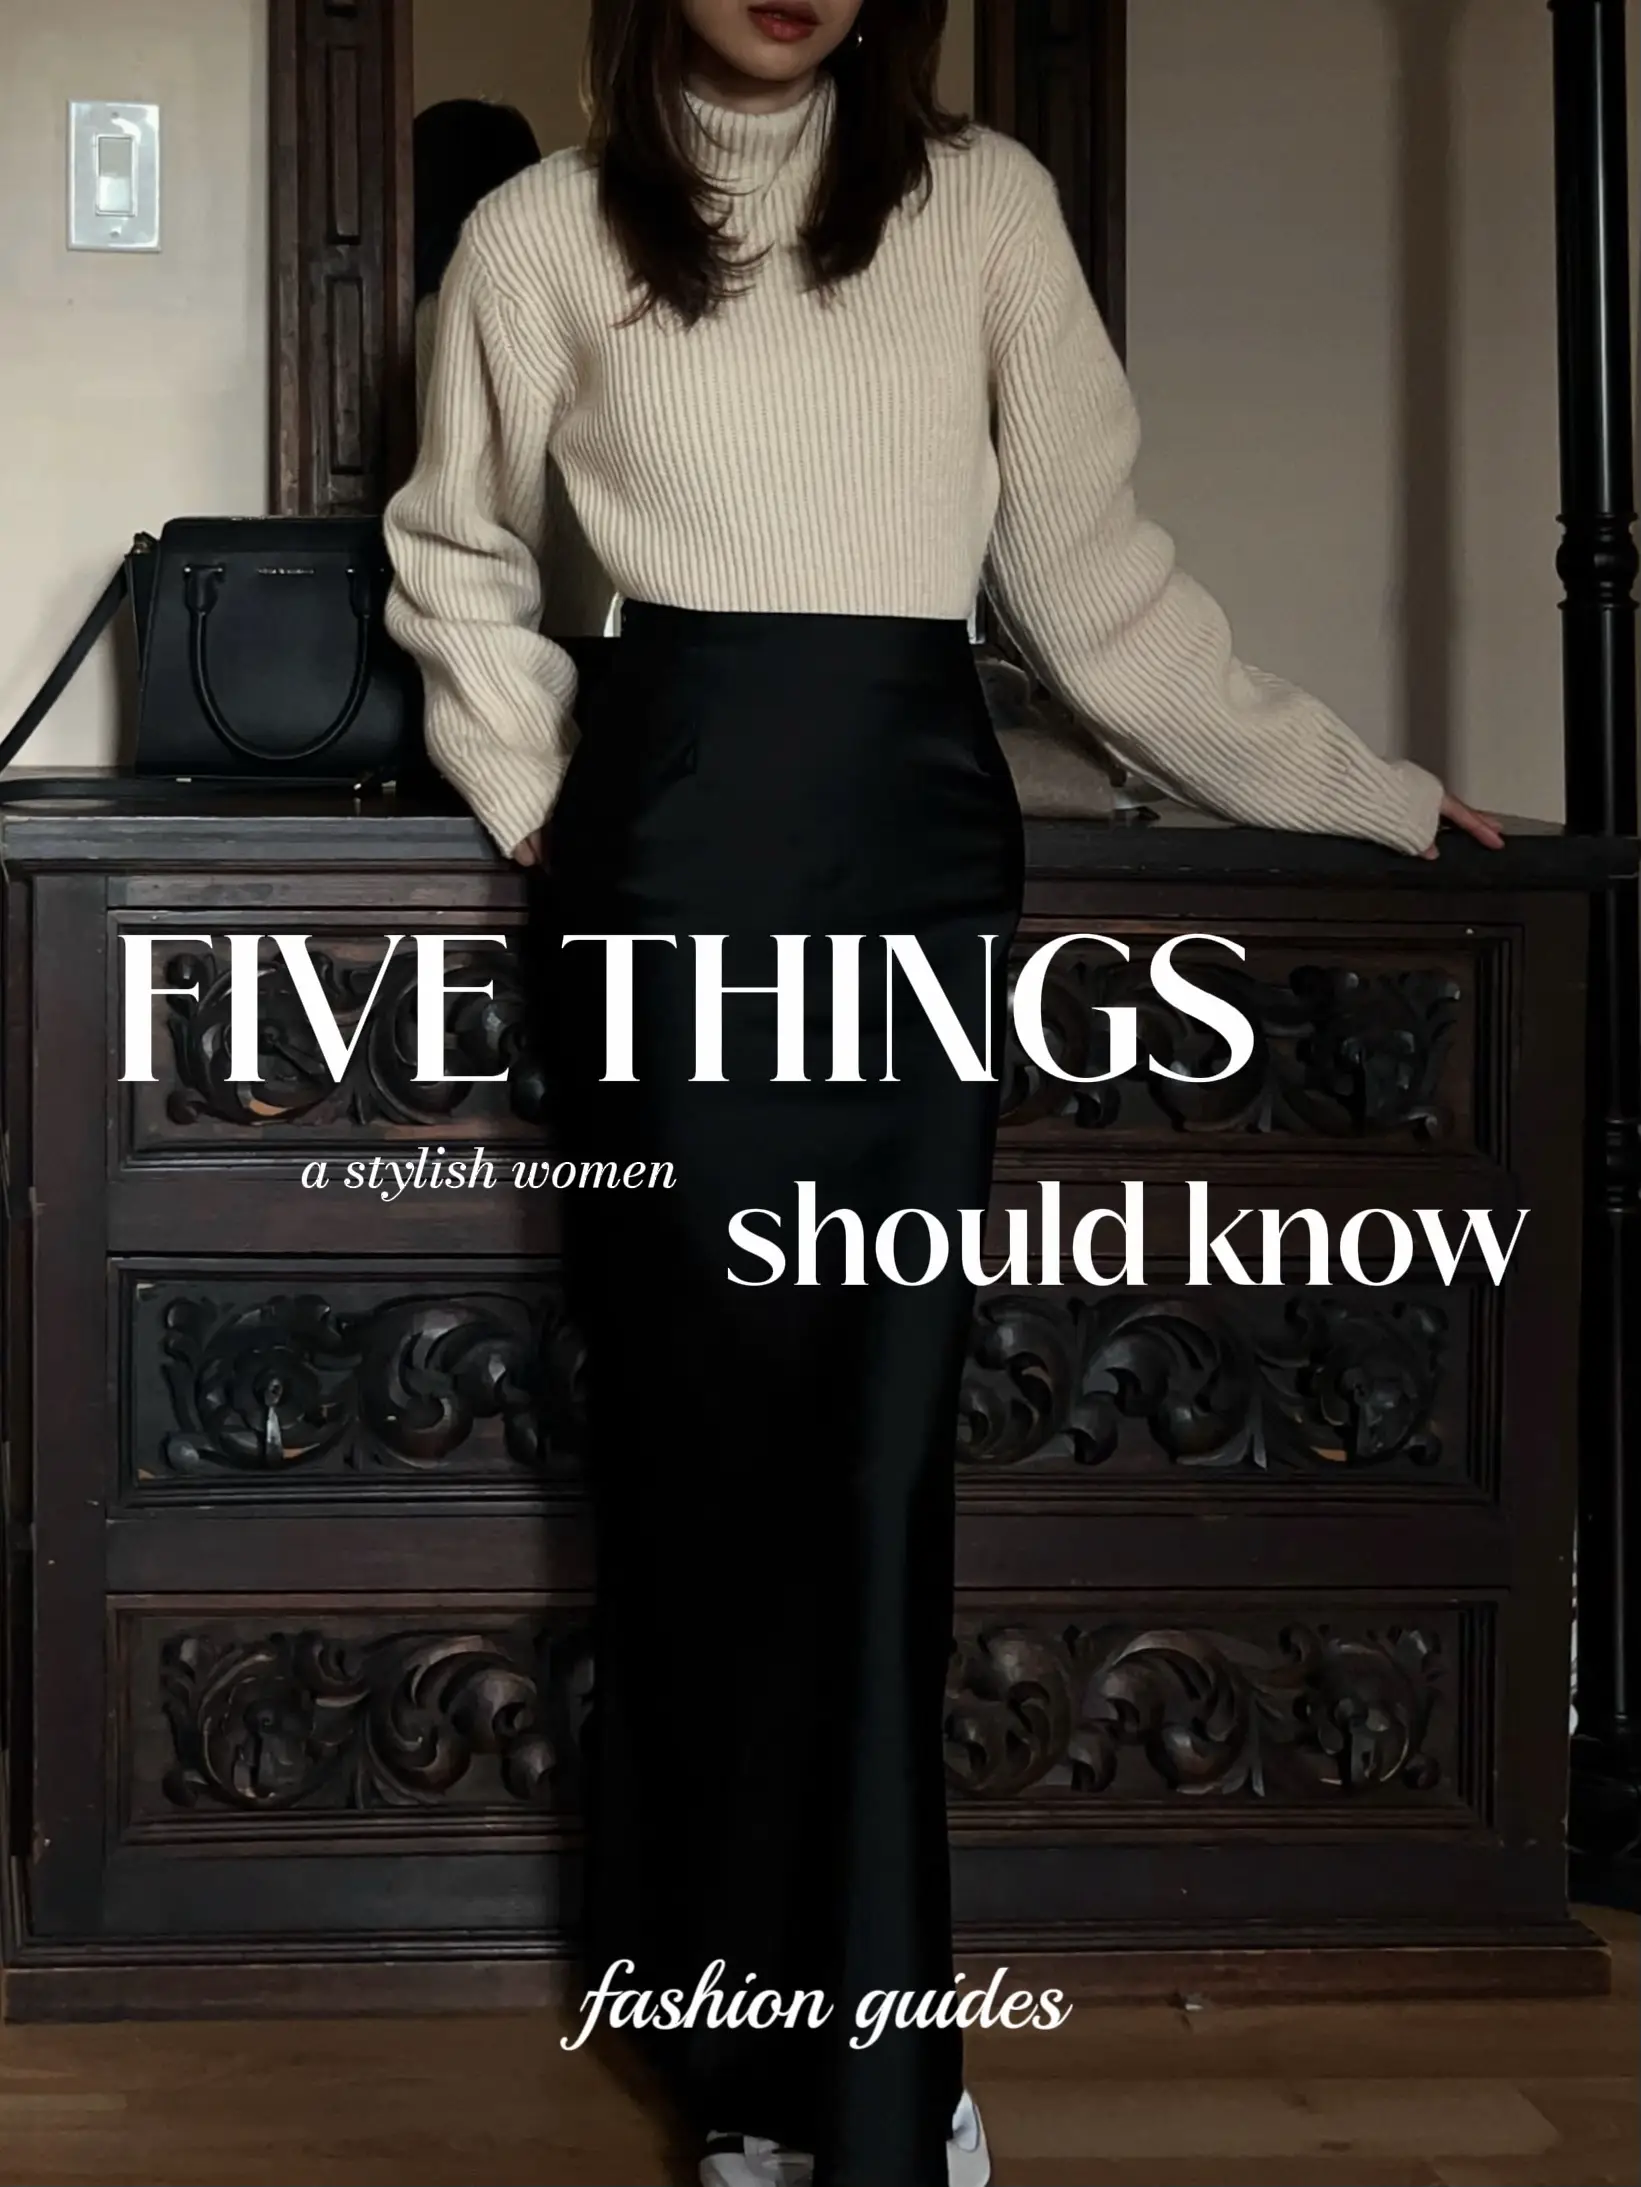 FIVE THINGS A STYLISH WOMAN SHOULD KNOW's images